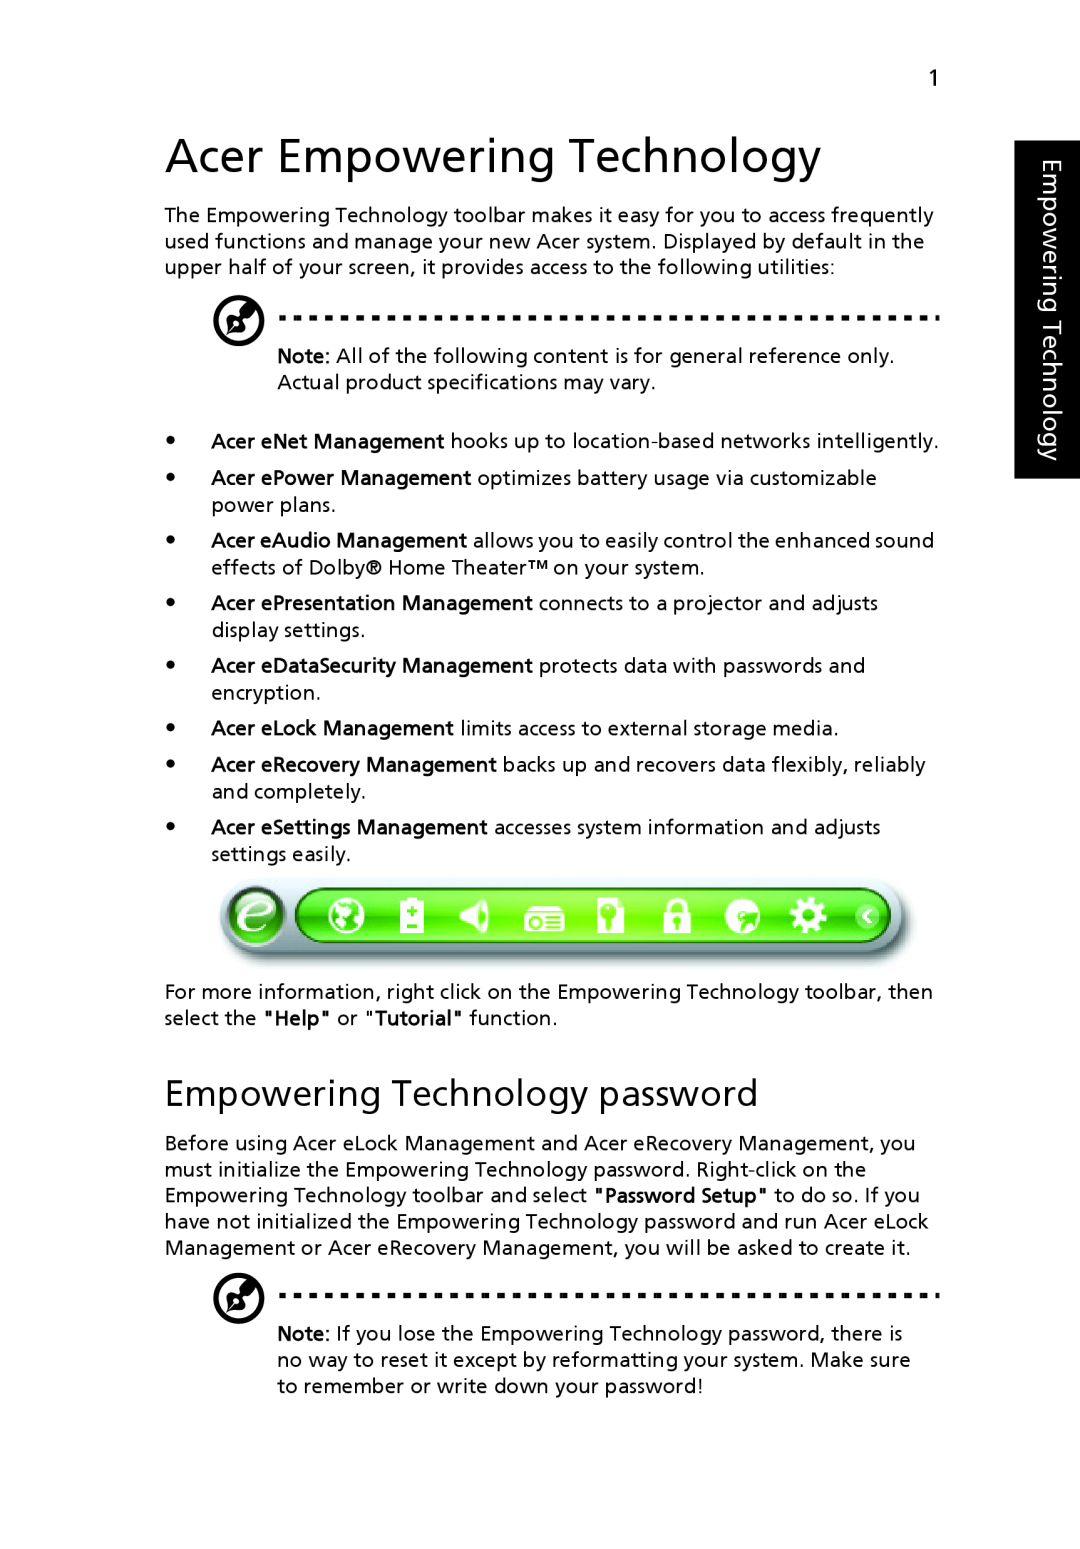 Acer MS2219, 4920 manual Acer Empowering Technology, Empowering Technology password 